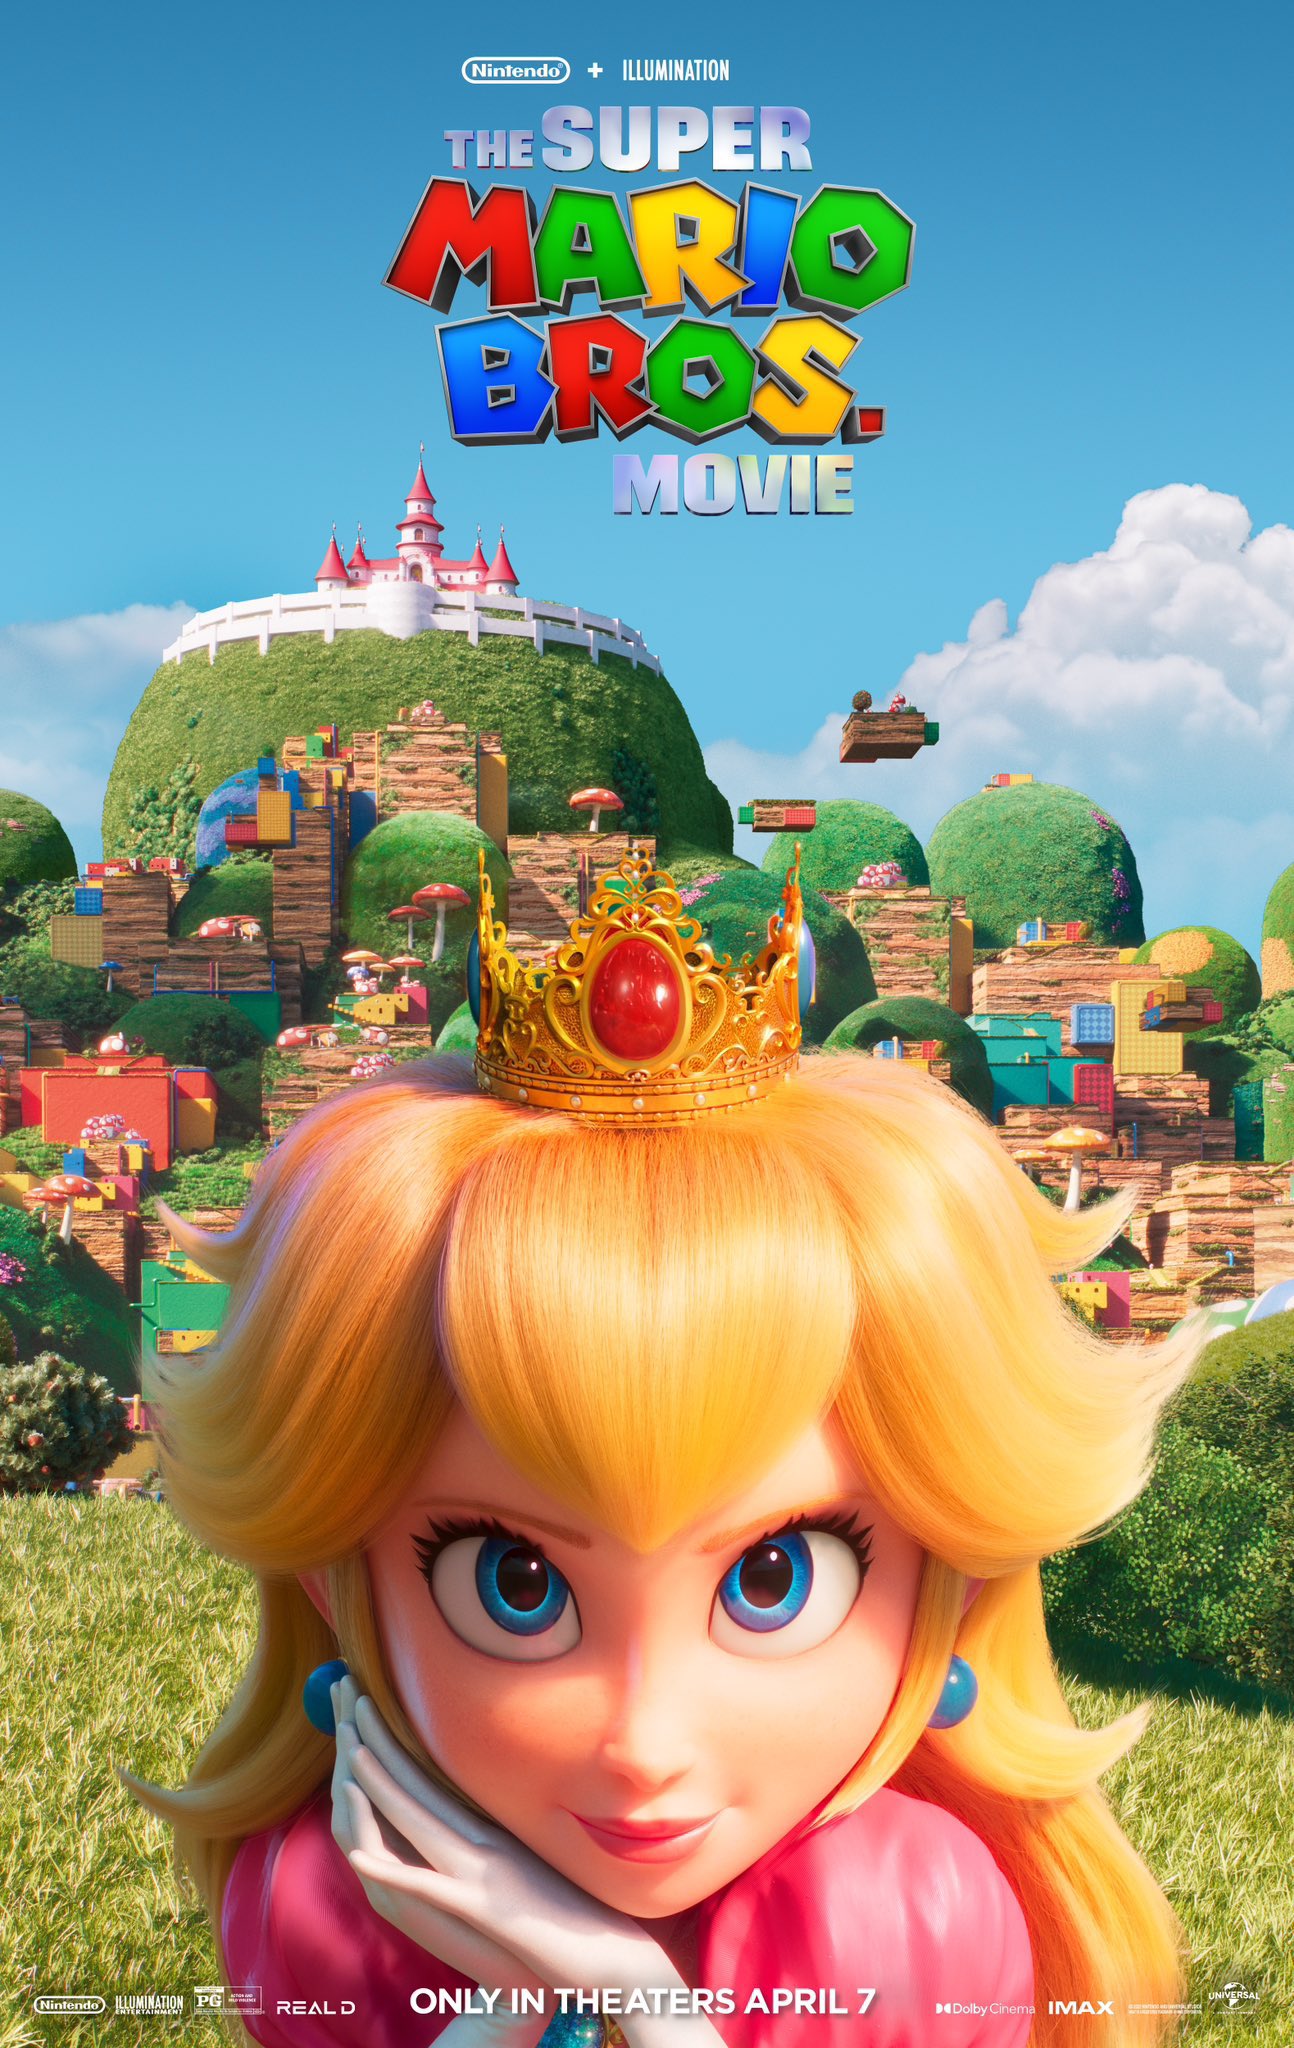 Pórtico Desaparecer cigarro DiscussingFilm en Twitter: "First character poster for Princess Peach,  voiced by Anya Taylor-Joy, in 'THE SUPER MARIO BROS MOVIE'.  https://t.co/ovgoUlnyzq" / Twitter